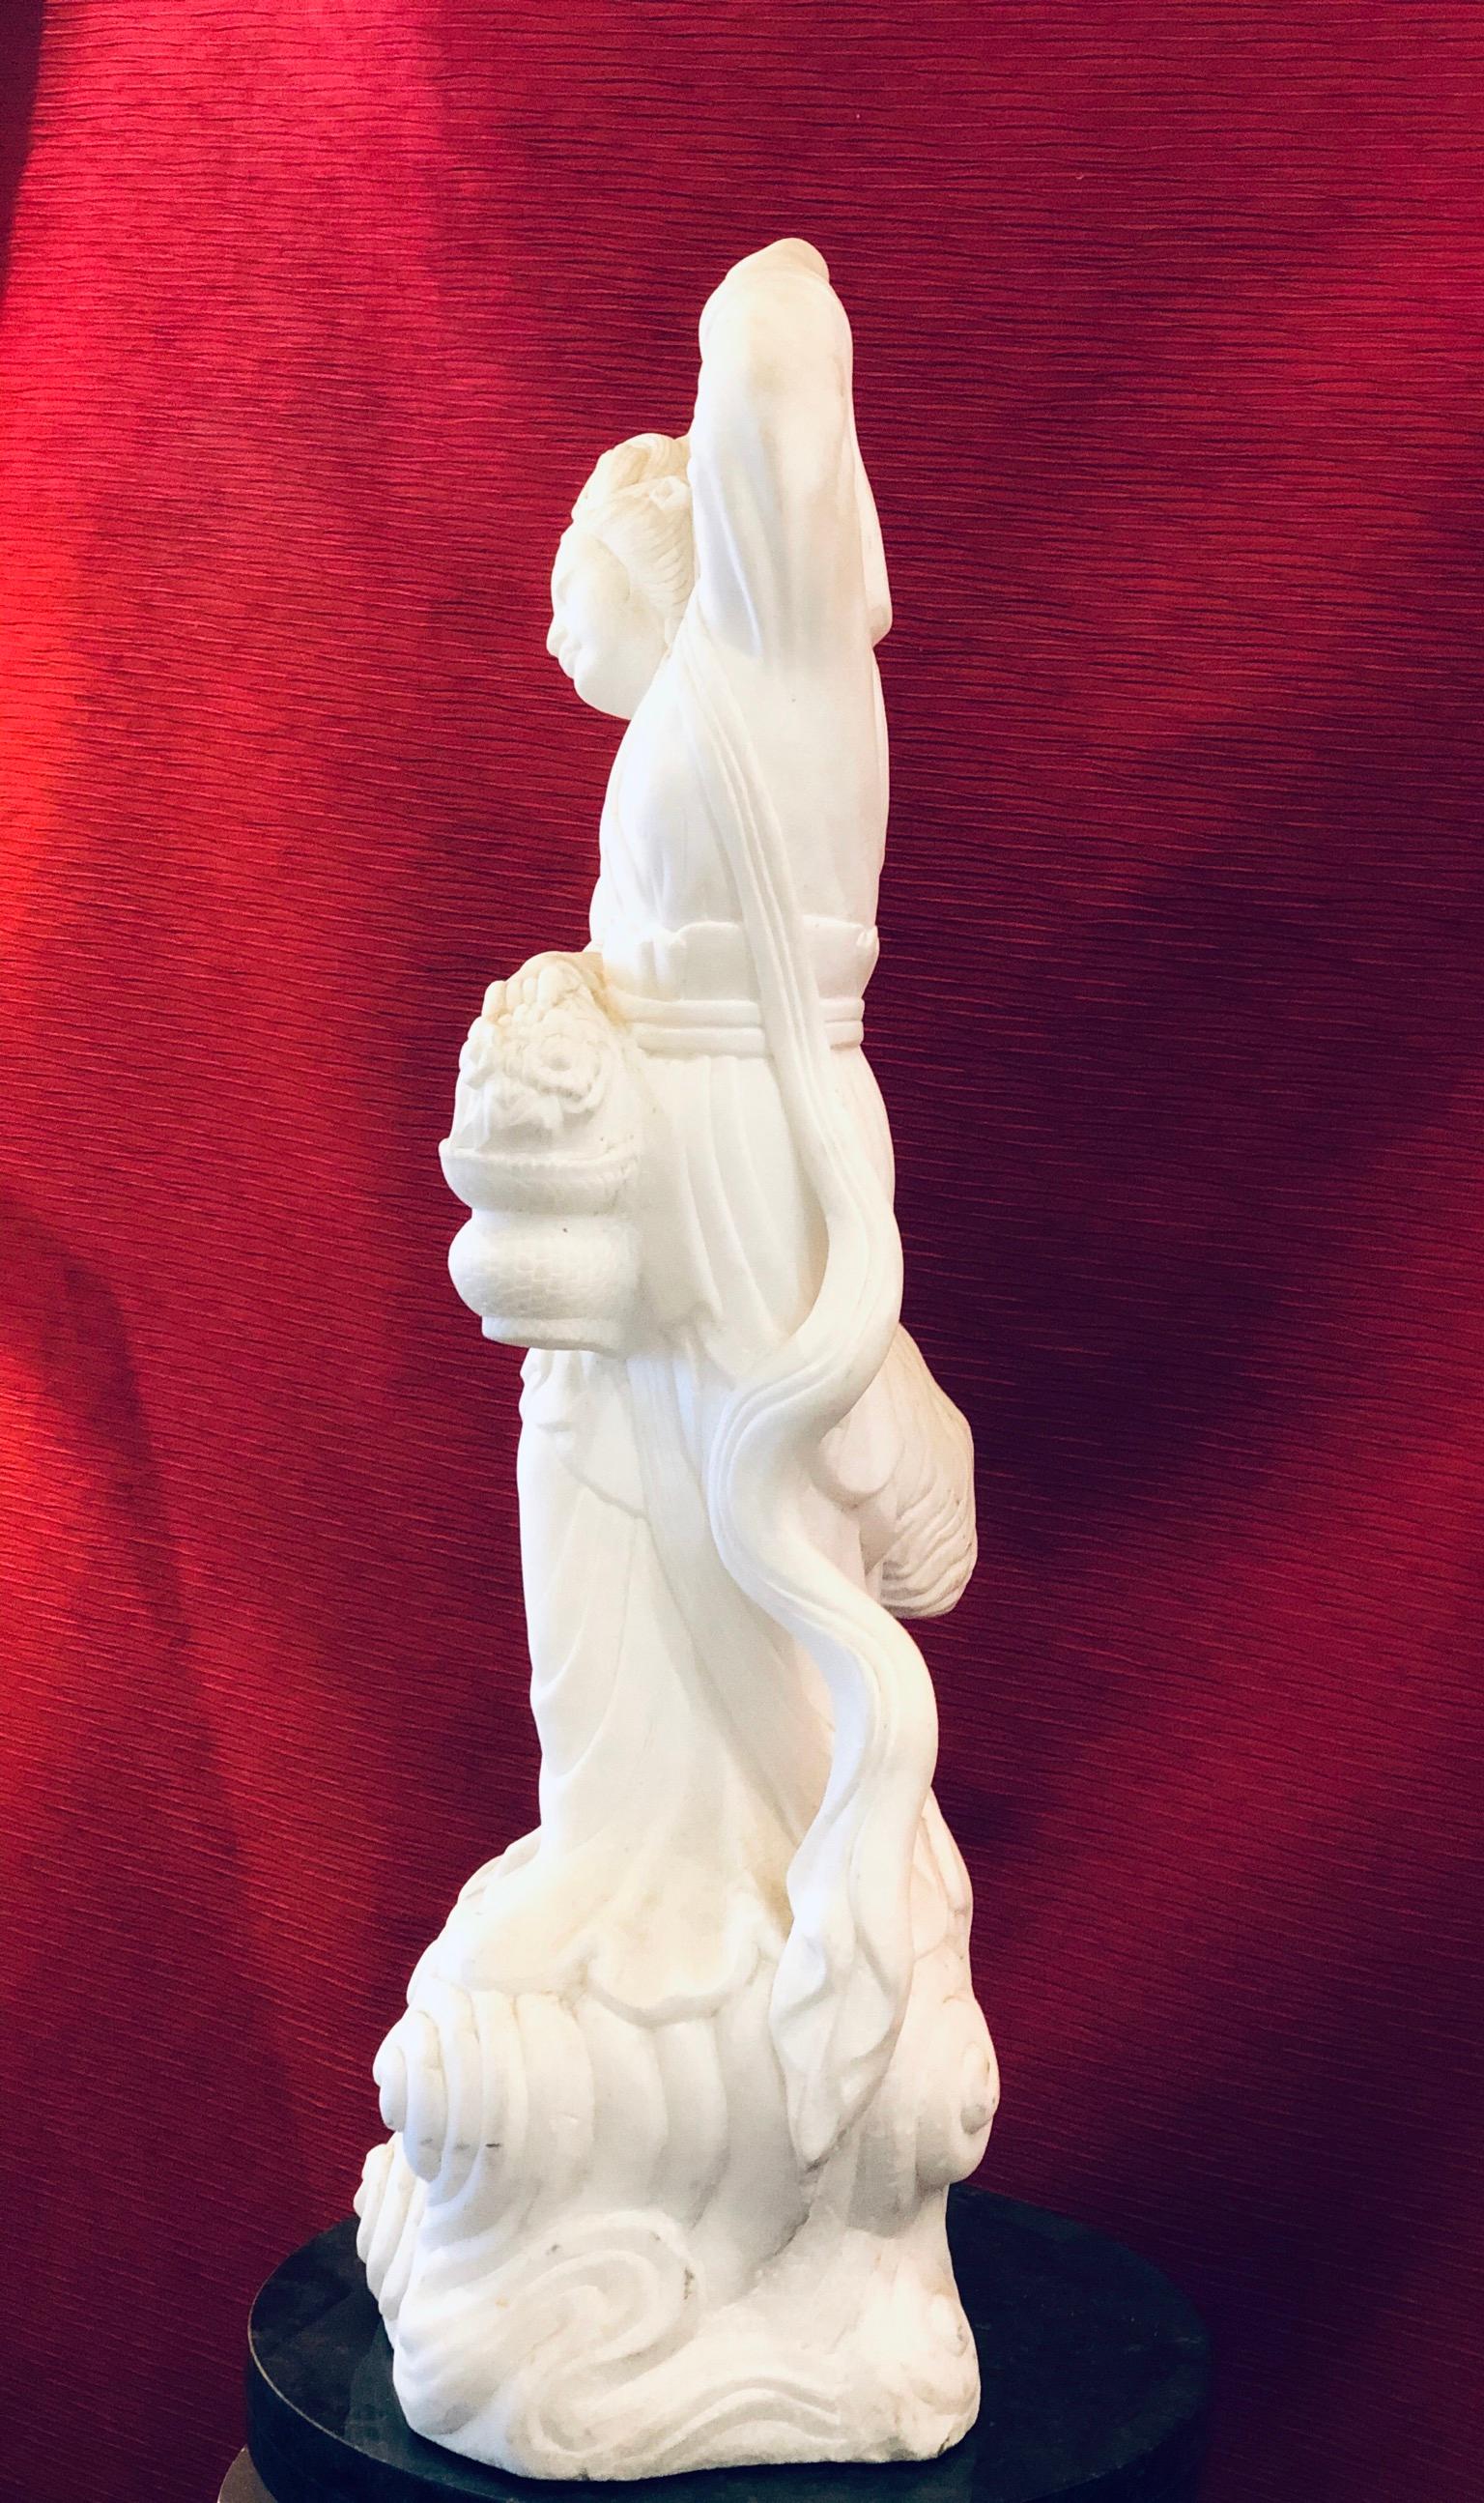 A beautiful solid alabaster antique Asian large sculpture hand carved, circa 1950s, great condition no chips or cracks or chips came out of a state in a very wealthy neighborhood called La Jolla. Nice detailed carving.